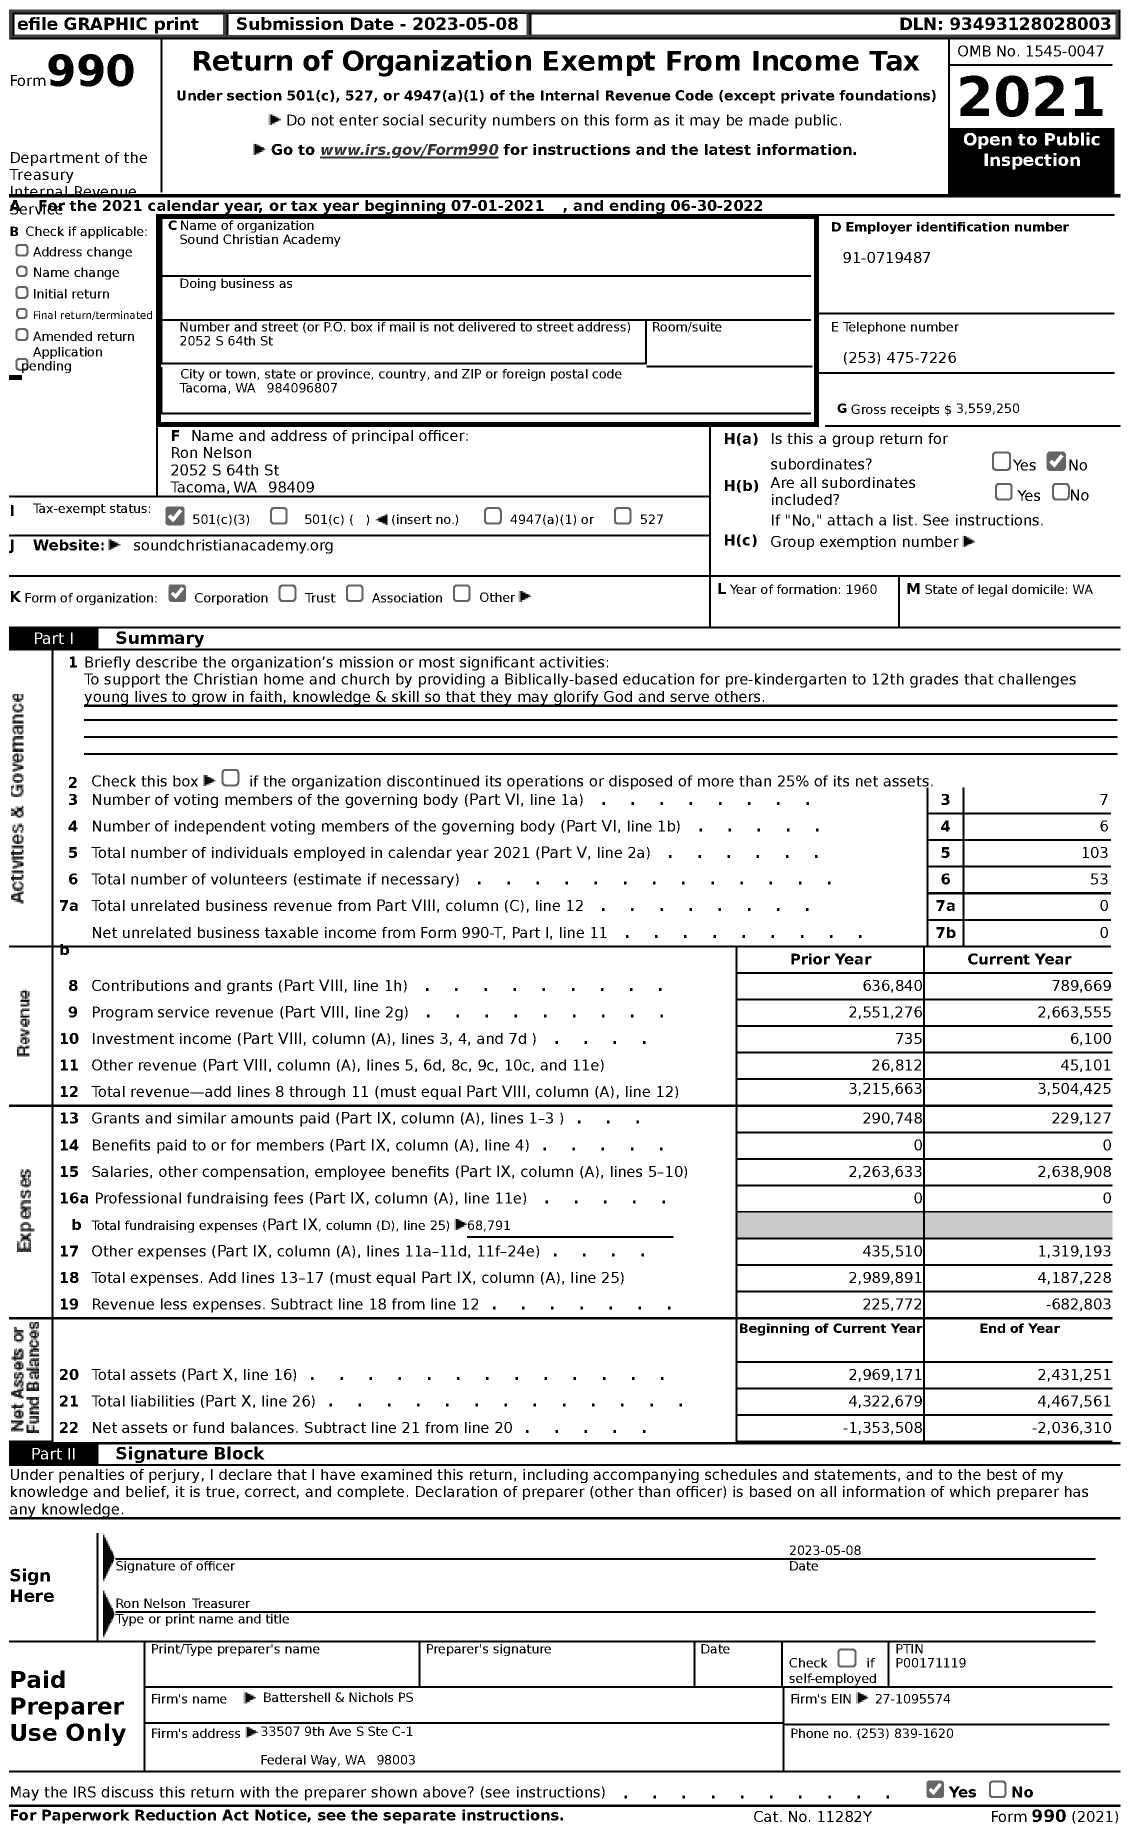 Image of first page of 2021 Form 990 for Sound Christian Academy (TBS)